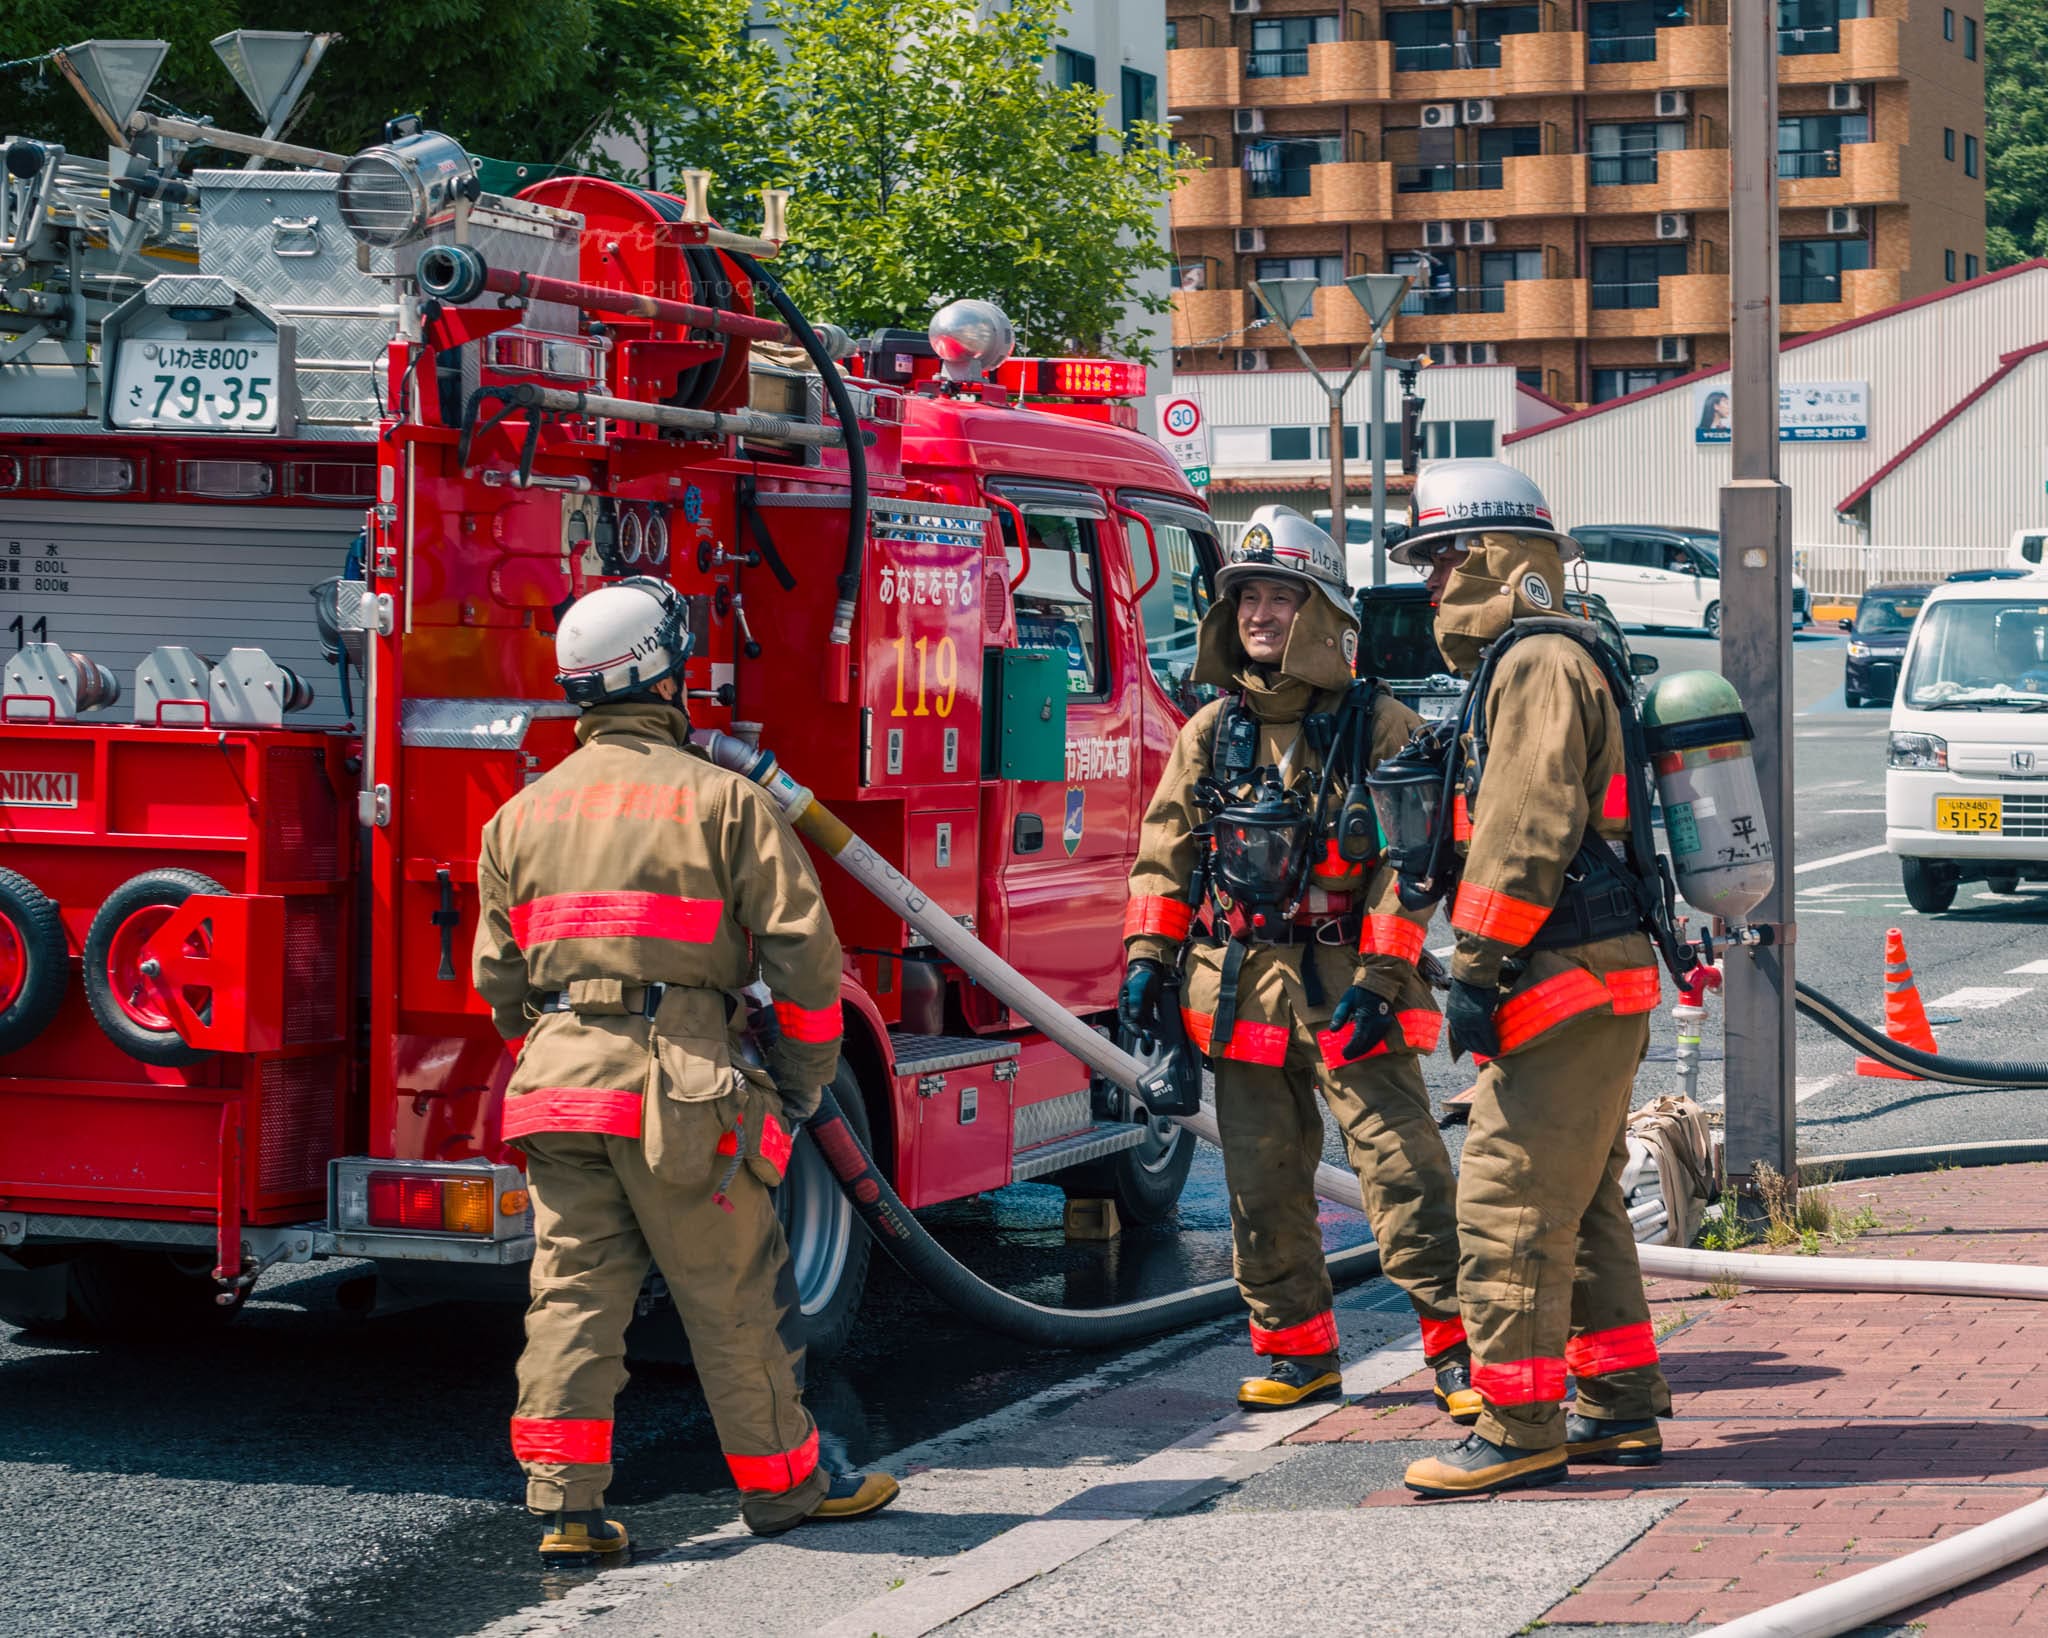 Japanese Firefighters in action with hose and engine 119 on sunny day.